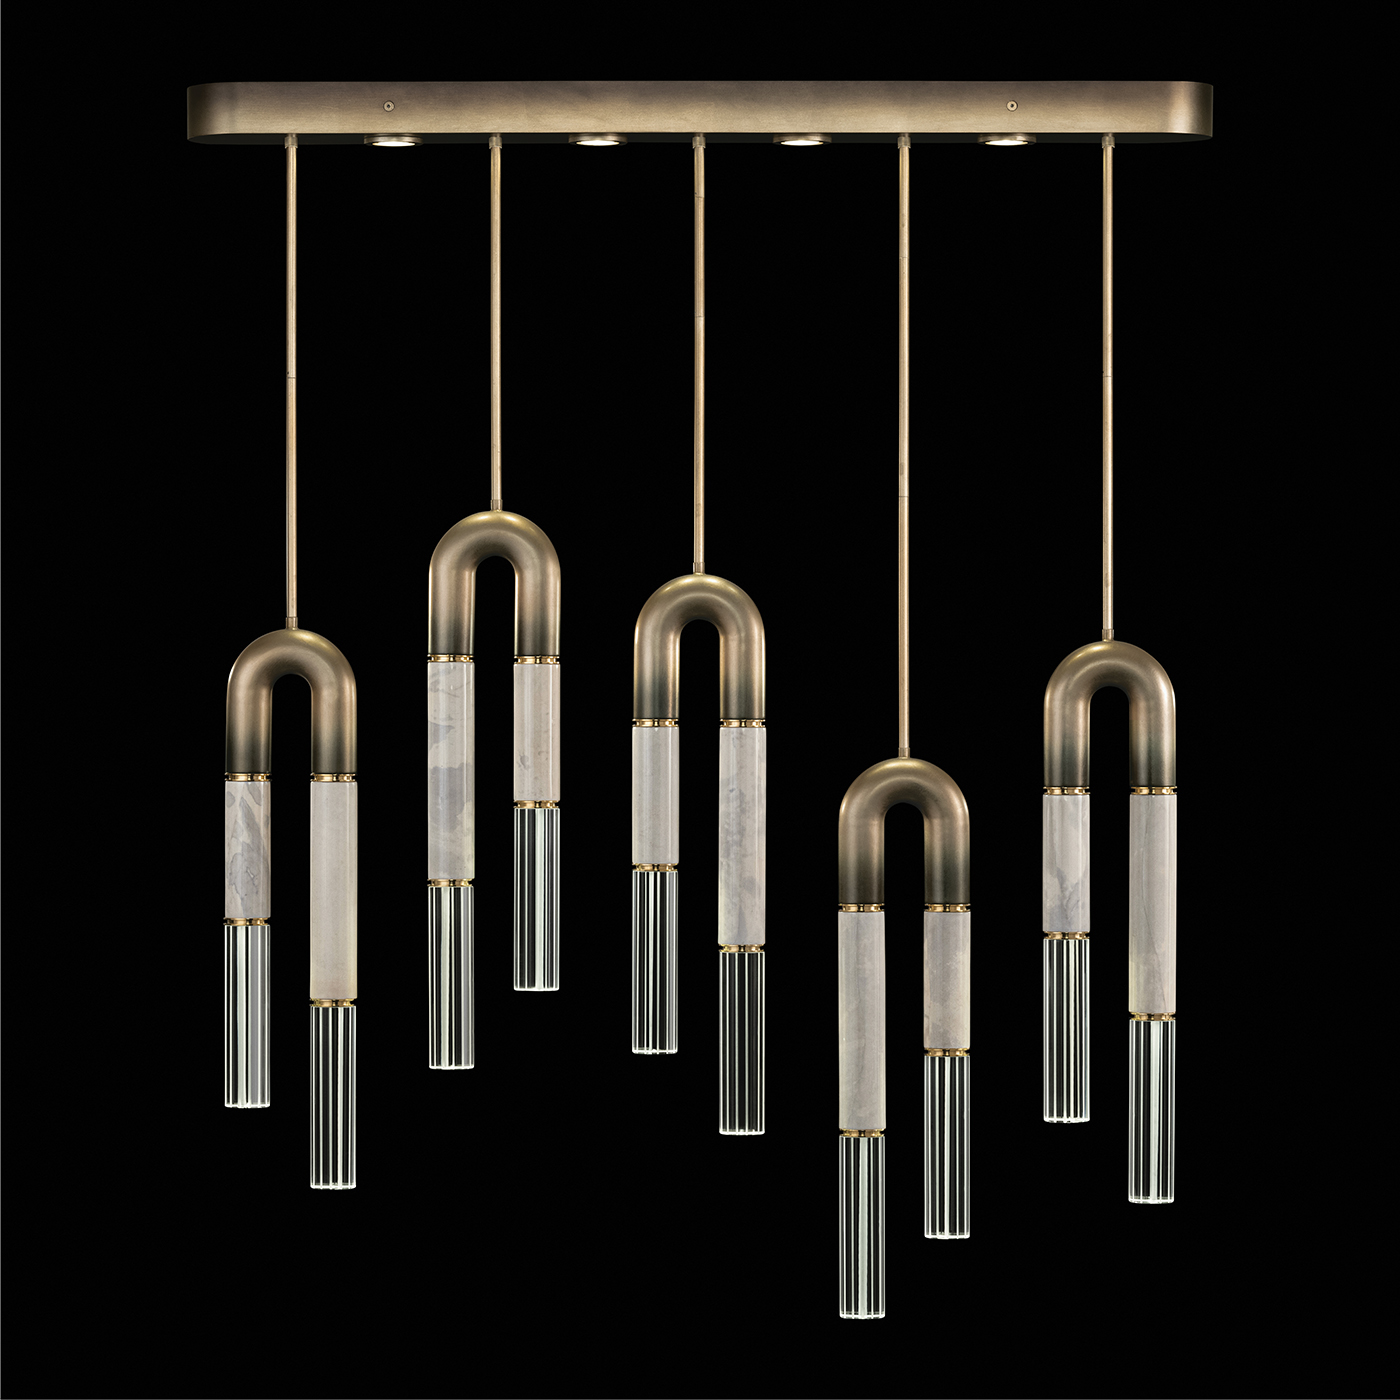 Amorphous lighting is one of the design trends at High Point Market 2023